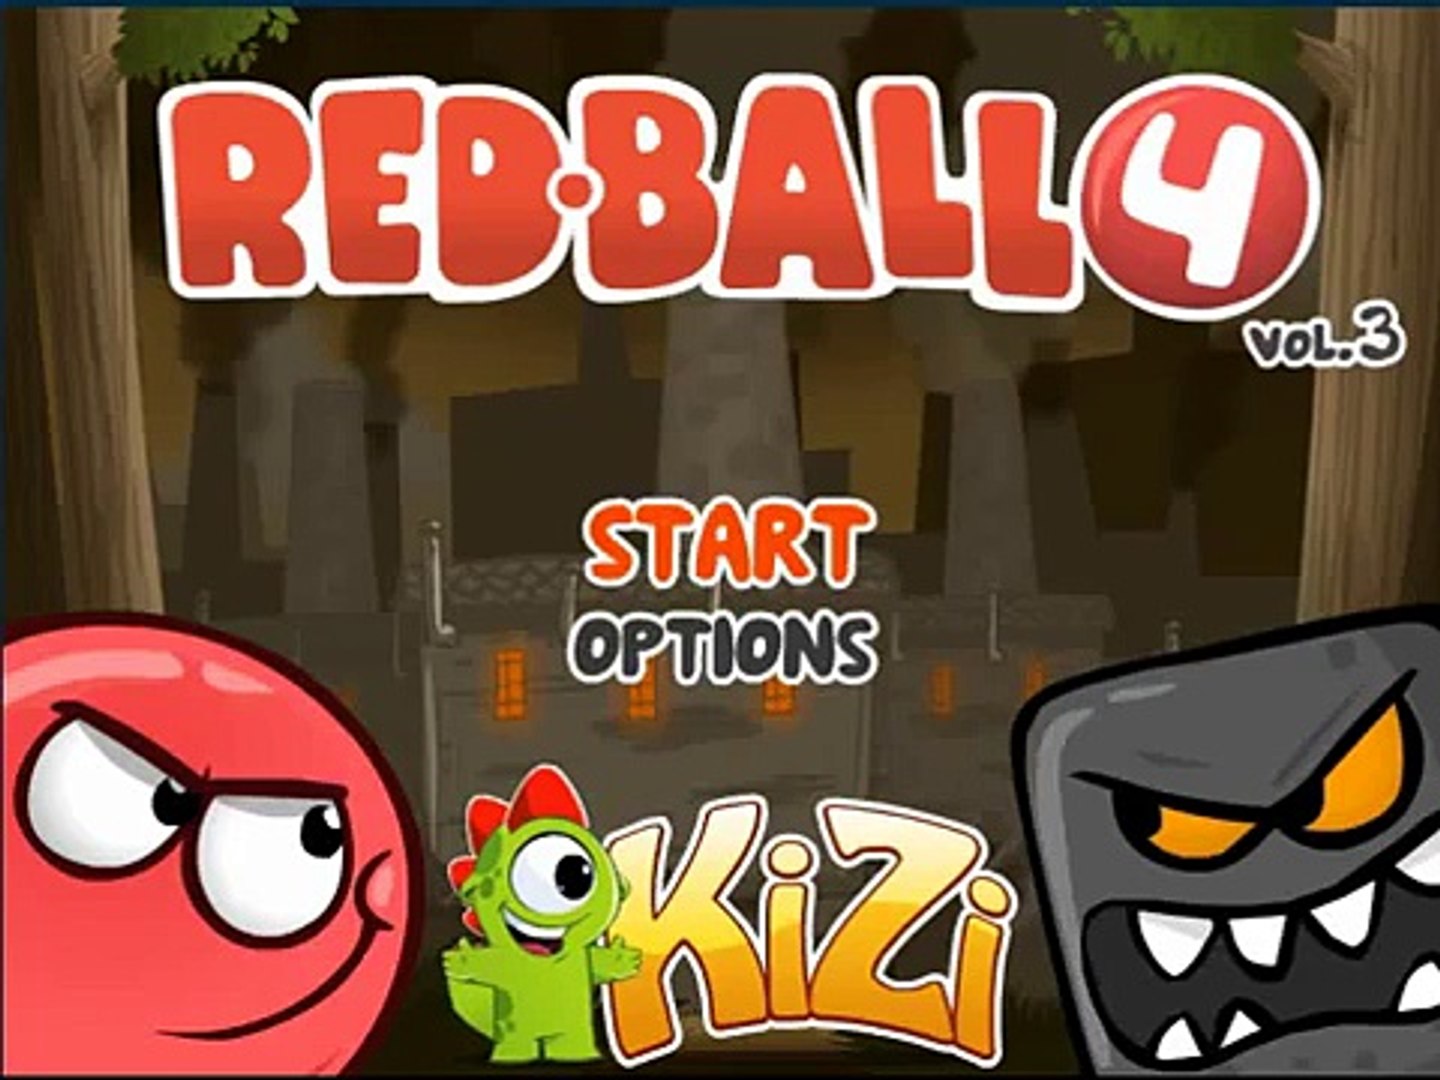 Red Ball 4 Volume 3 Walkthrough Gameplay All Levels - Dailymotion Video